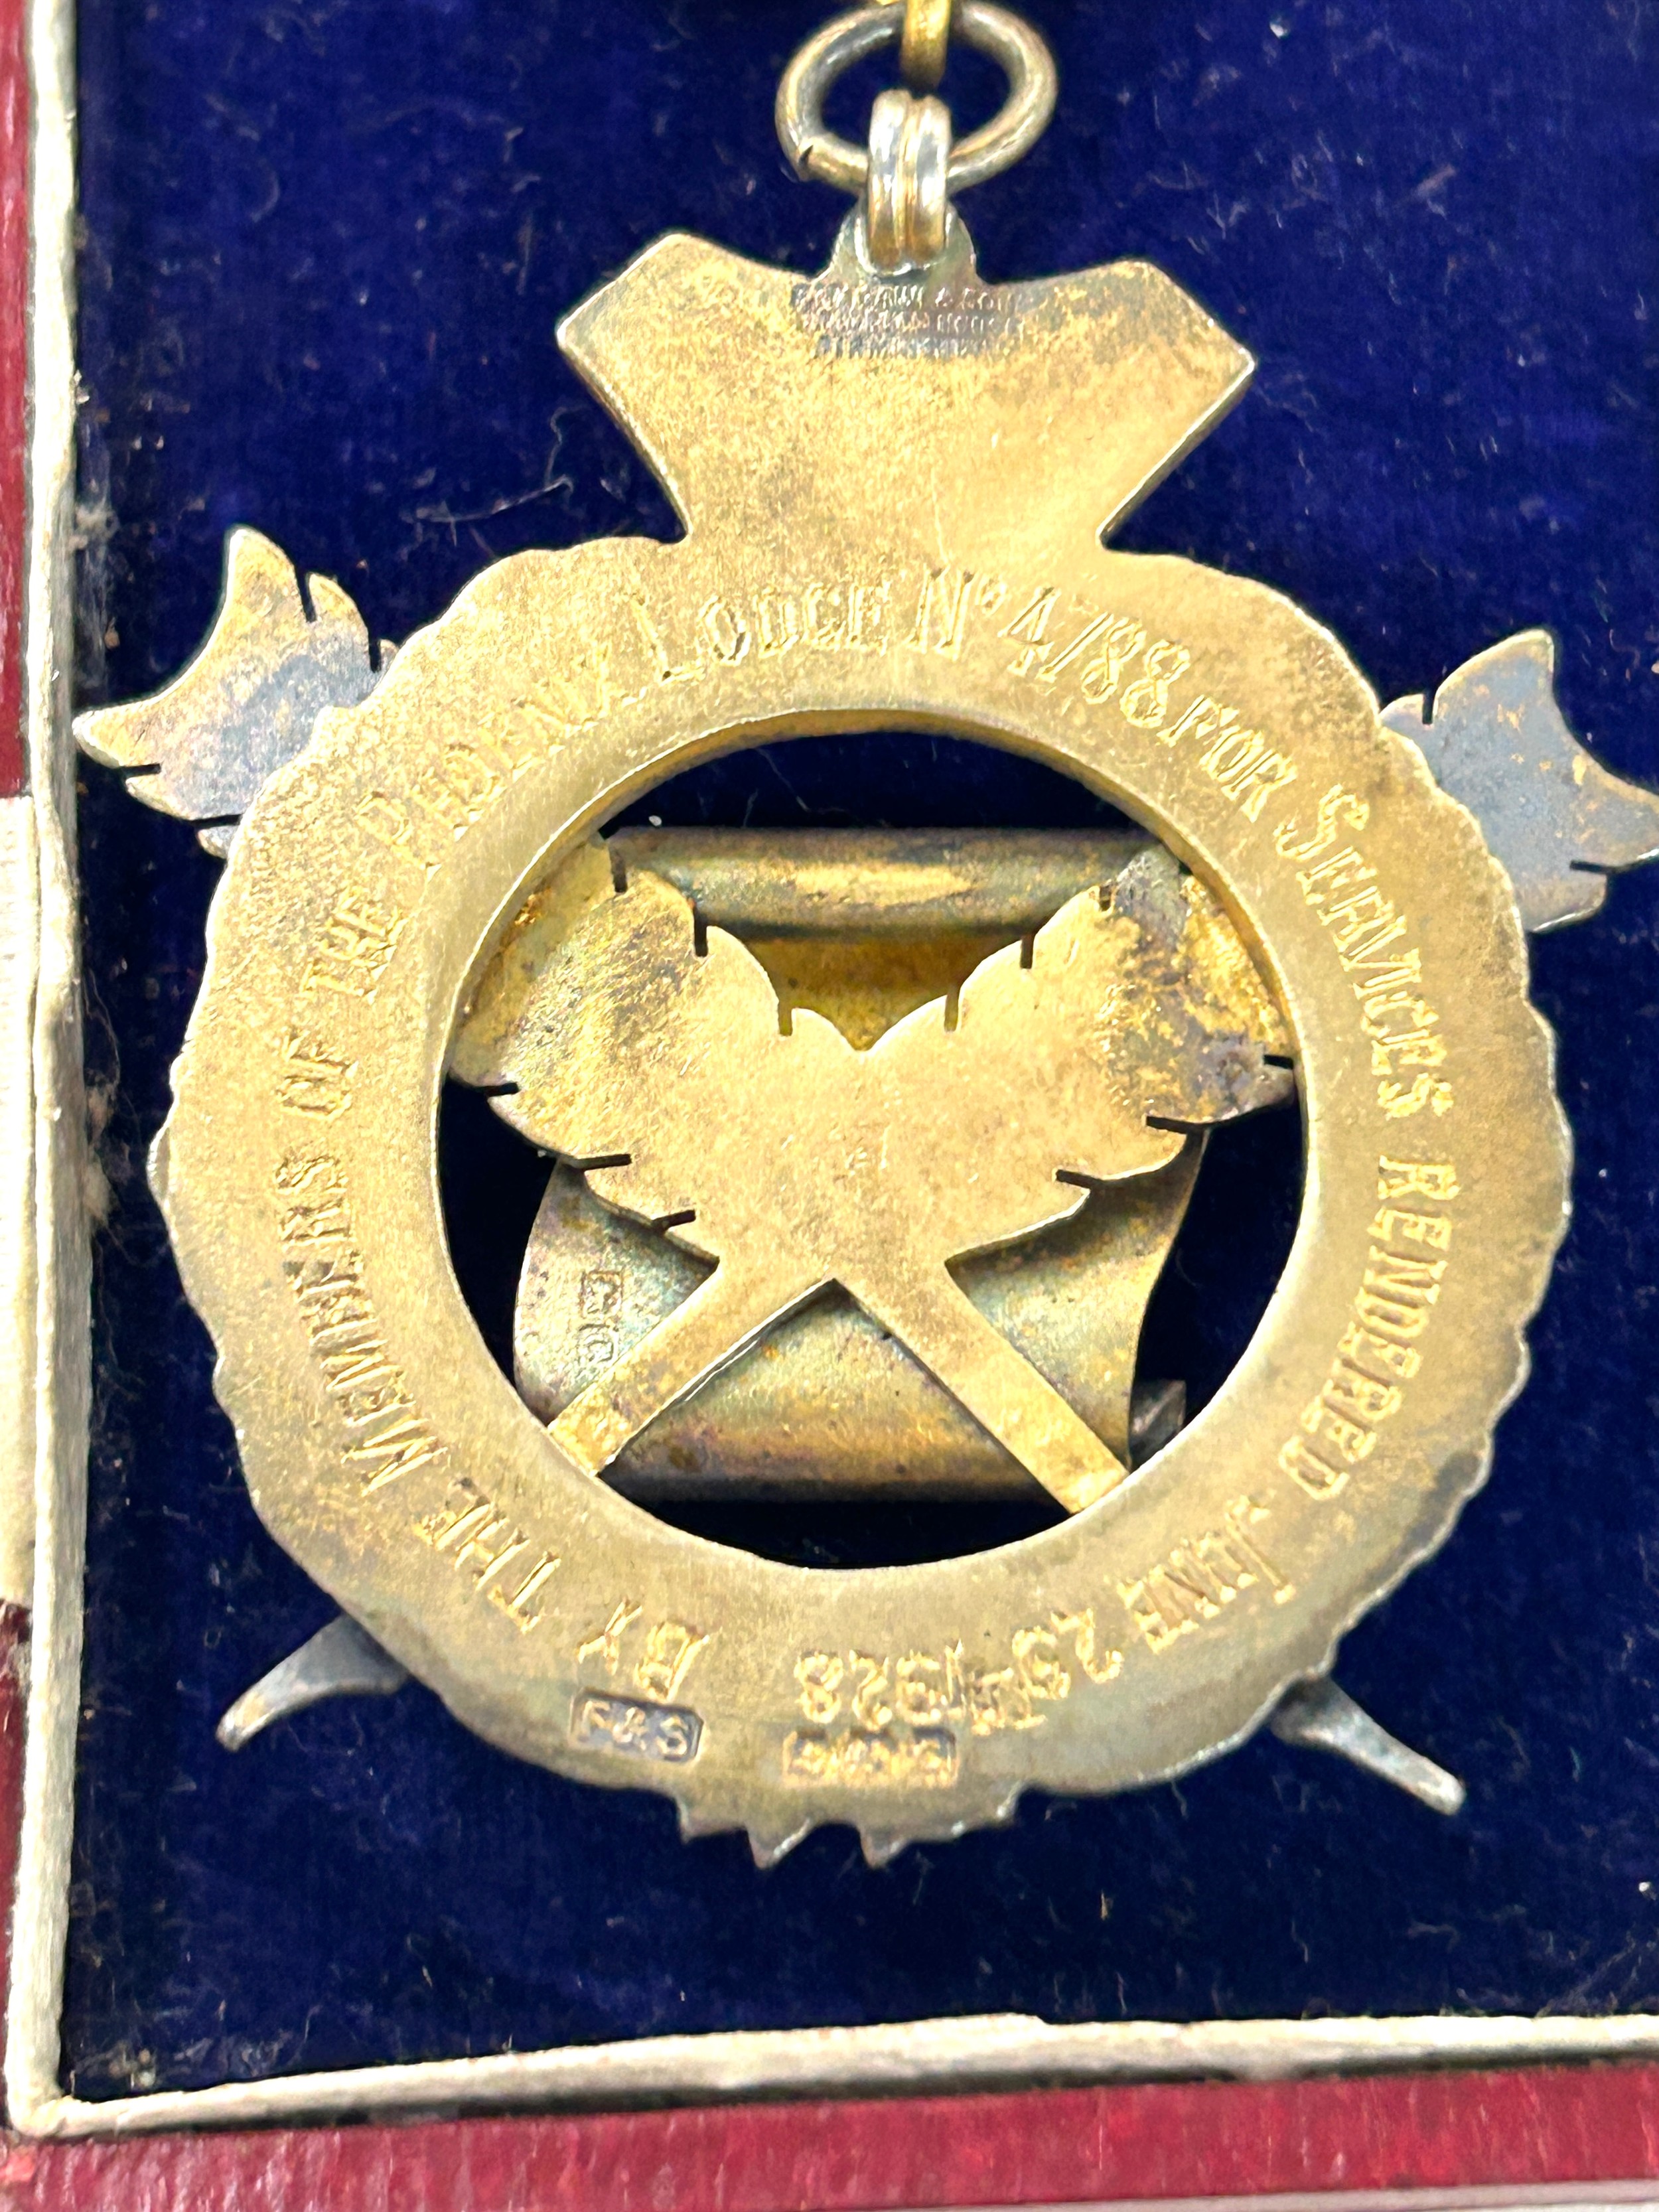 Boxed masonic silver service rendered medal june 29th 1928 presented to Bro E. Baisden by the - Image 4 of 5